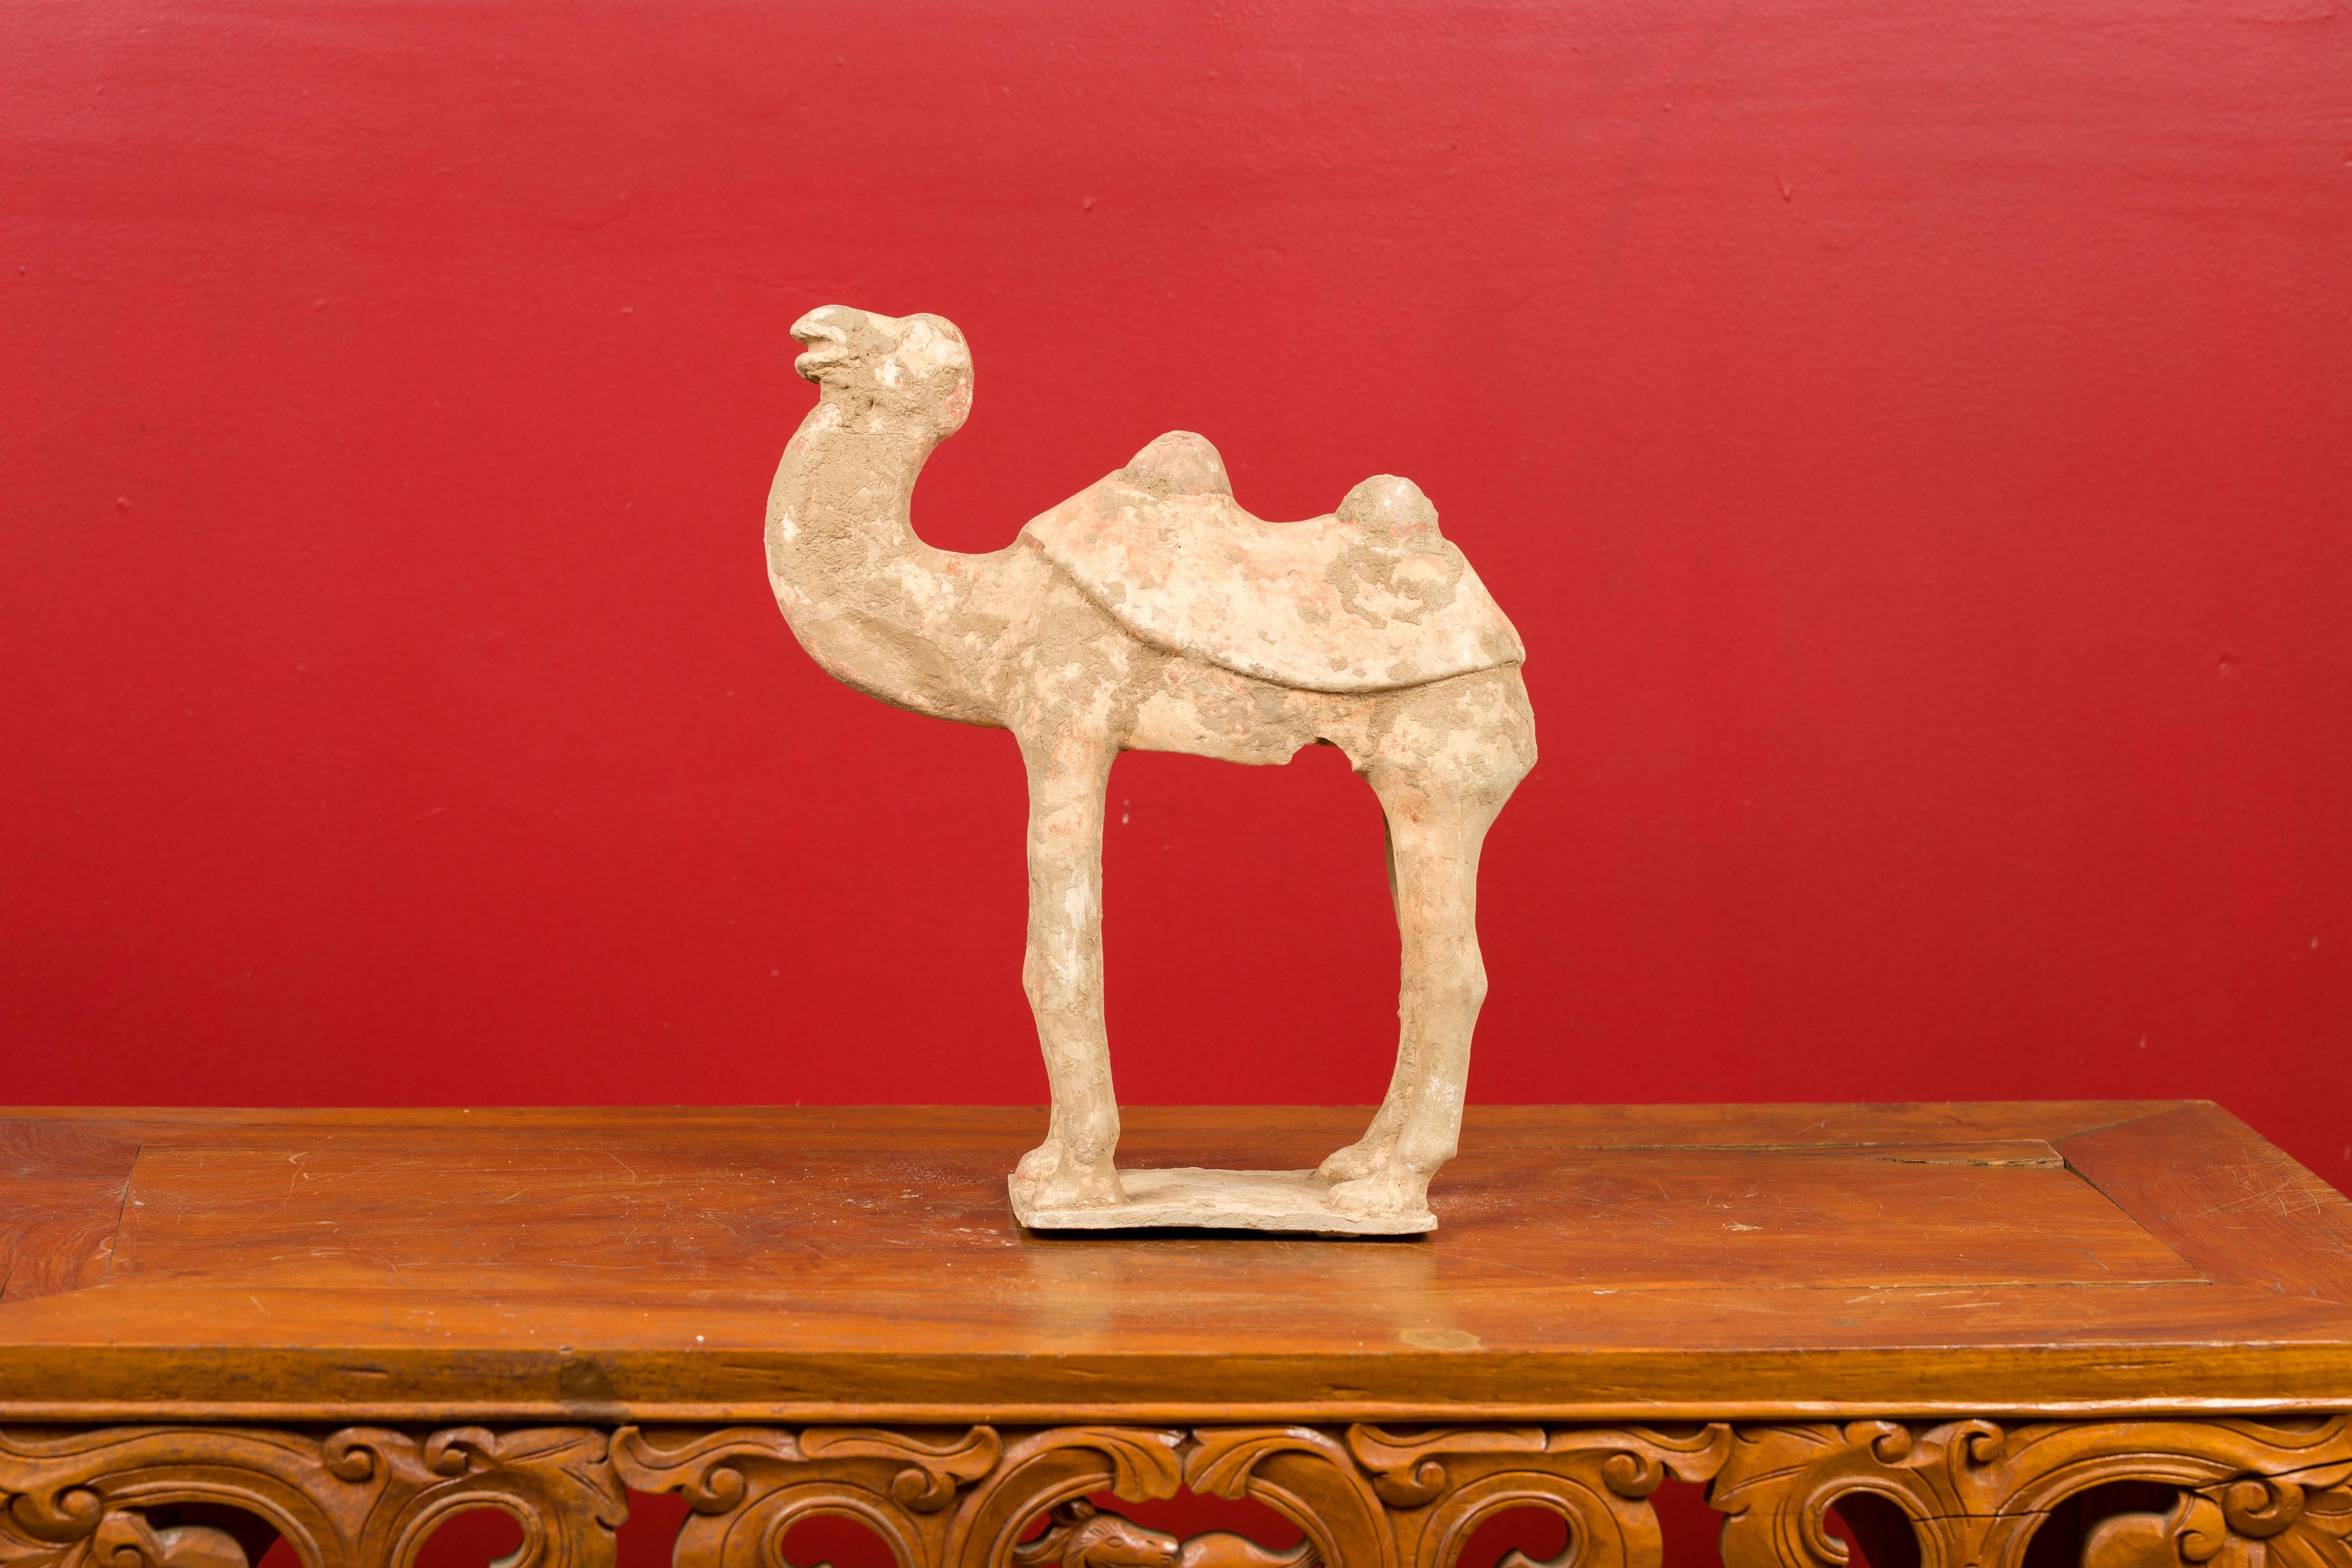 Chinese Han Dynasty 202 BC-200 AD Mingqi Camel with Original Orange Paint 5